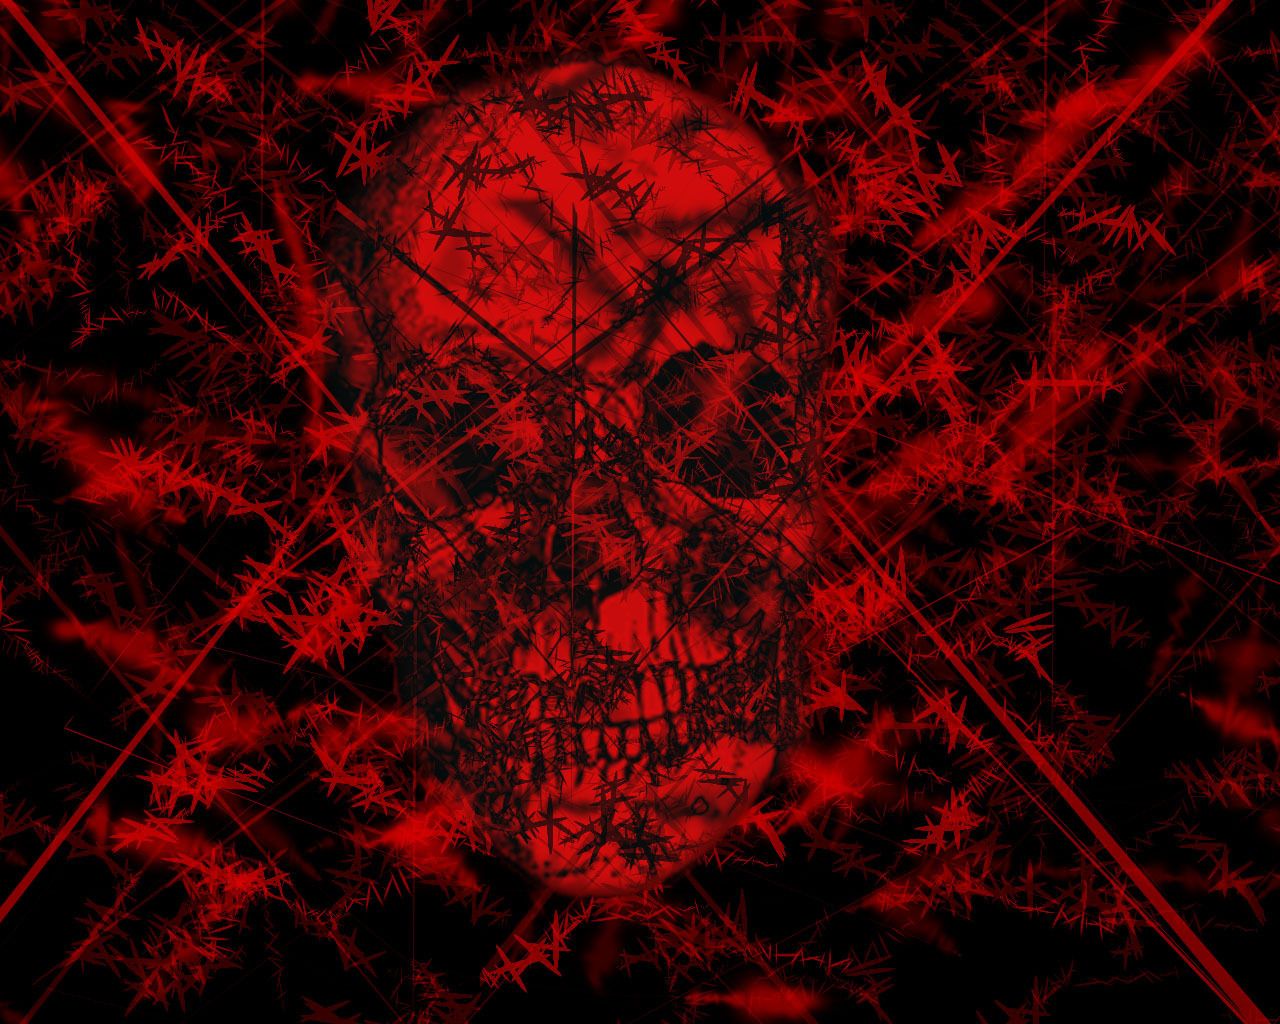 A skull is surrounded by red and black spider webs - Gothic